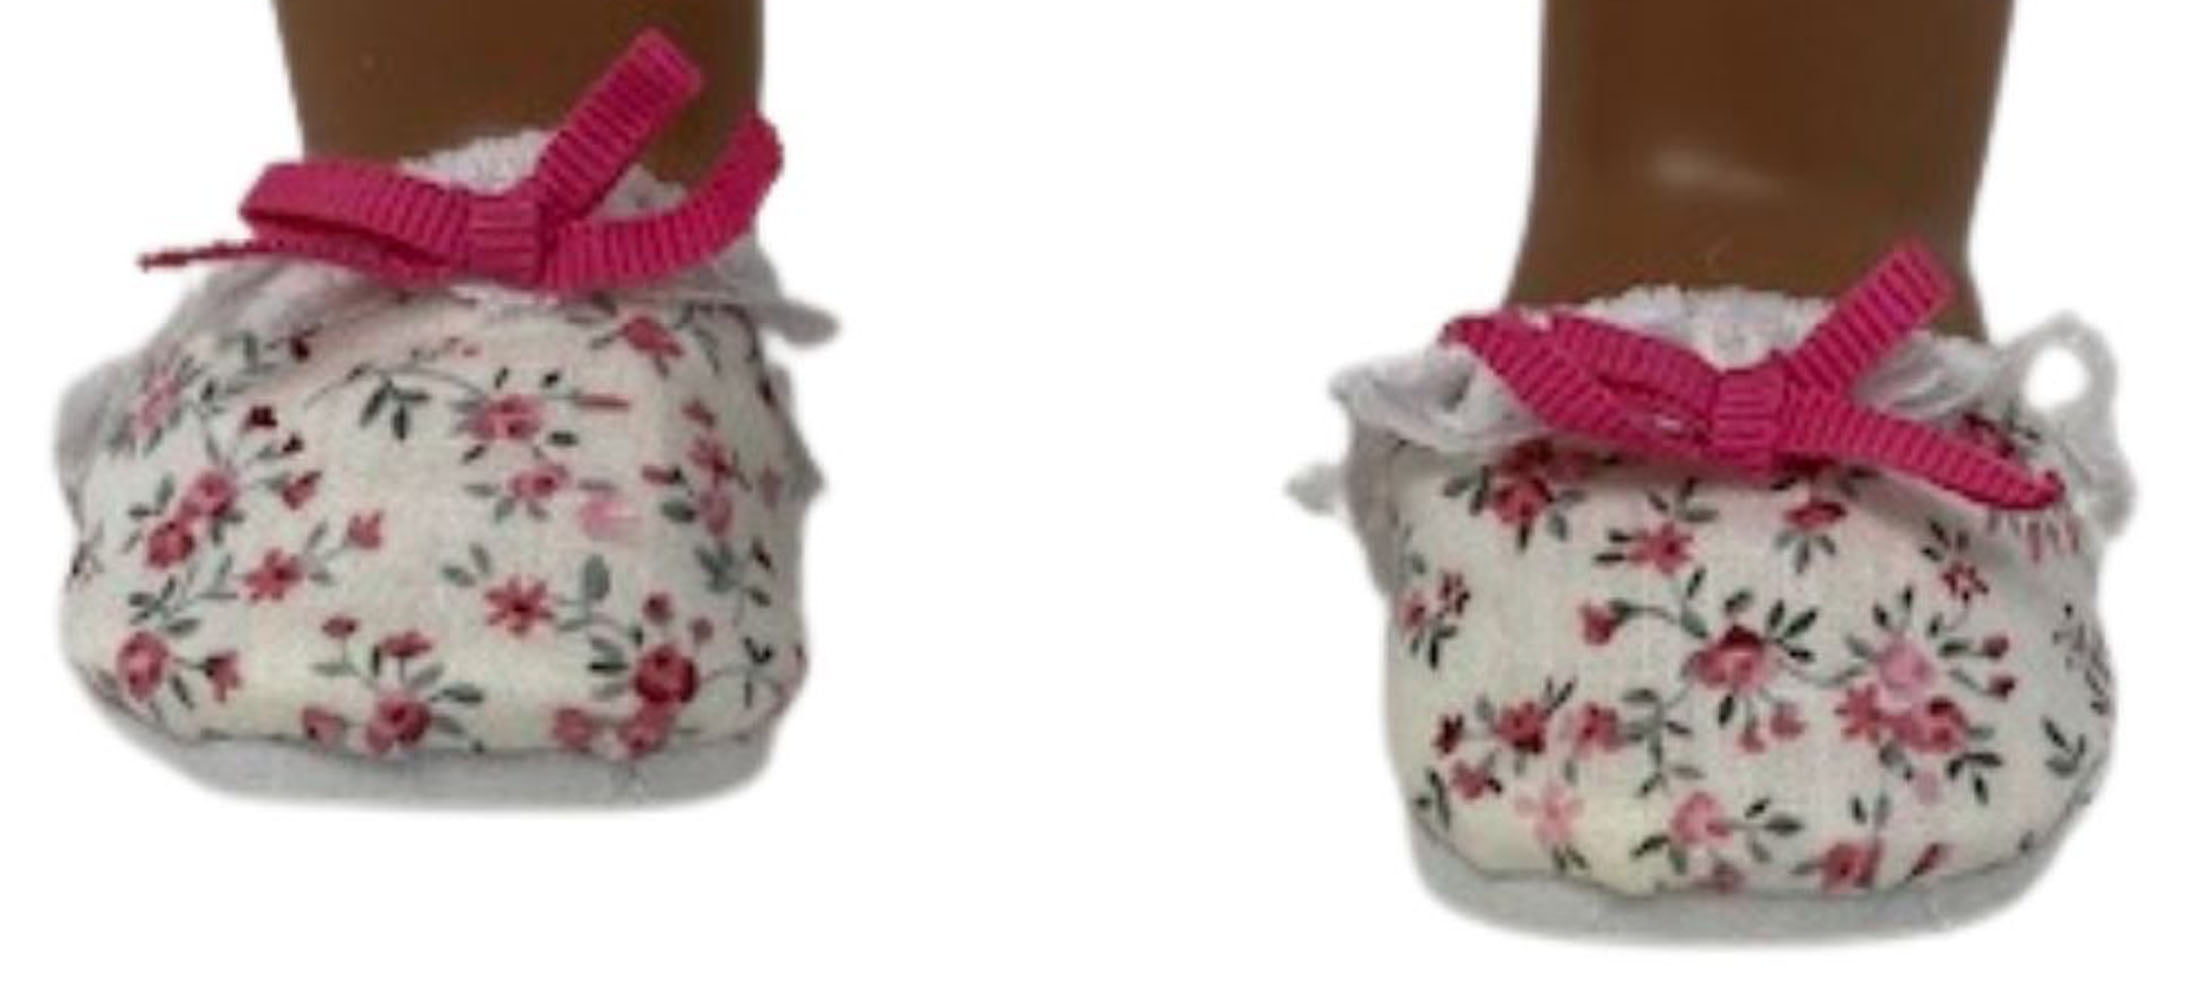 Sock Monkey Scuff Slippers for 18" American Girl Doll Clothes Accessories 